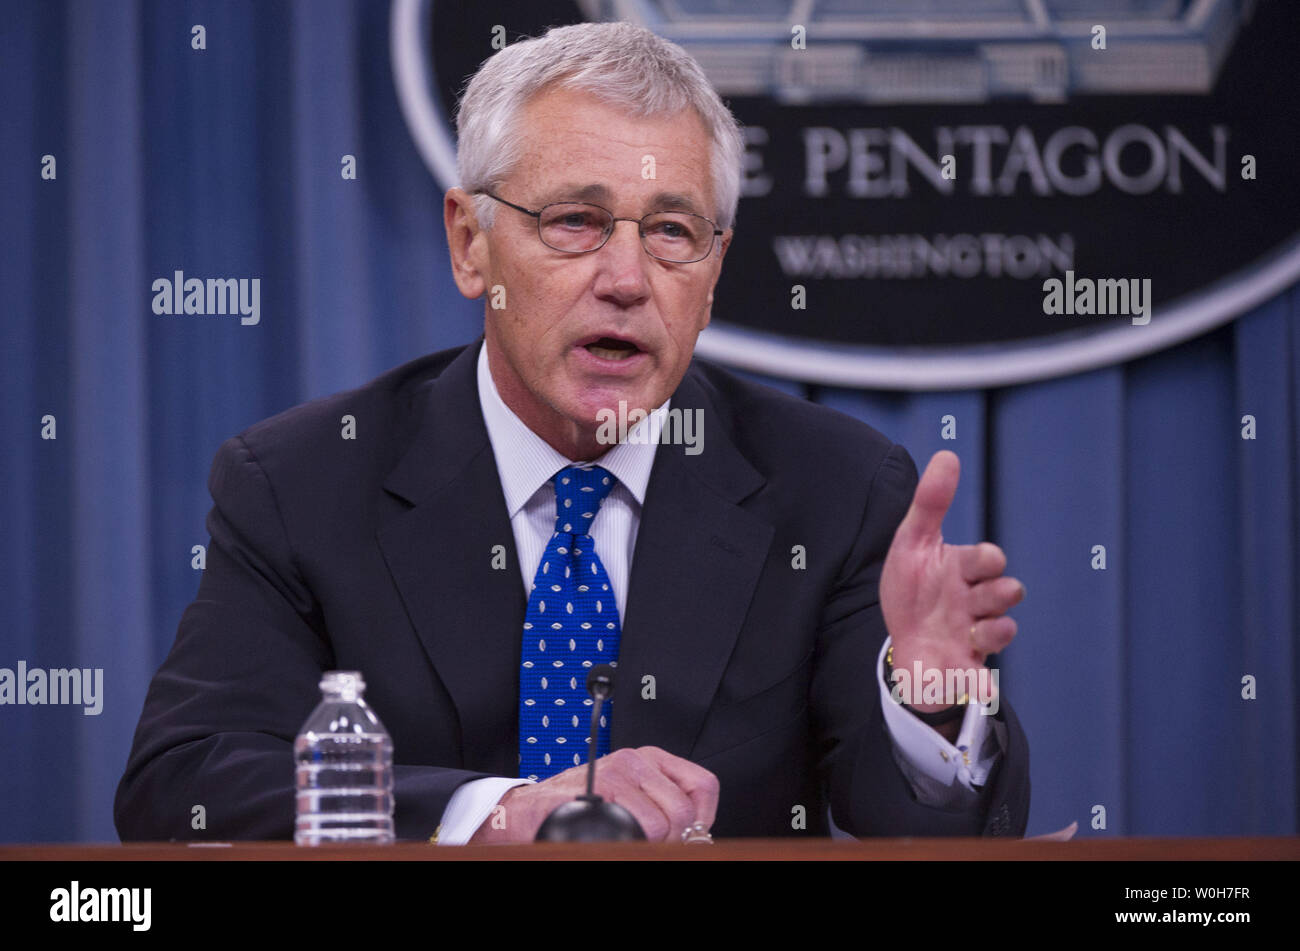 Defense Secretary Chuck Hagel speaks during a press briefing at the Pentagon in Arlington, Virginia on September 18, 2013.  Hagel is ordering reviews of security measures of U.S defense facilities worldwide and reviews of security clearance procedures. These reviews come in the wake of Monday's Navy Yard shooting that left 13 people dead including gunman Aaron Alexis, who was a Defense Department contractor with a security clearance.  UPI/Kevin Dietsch Stock Photo